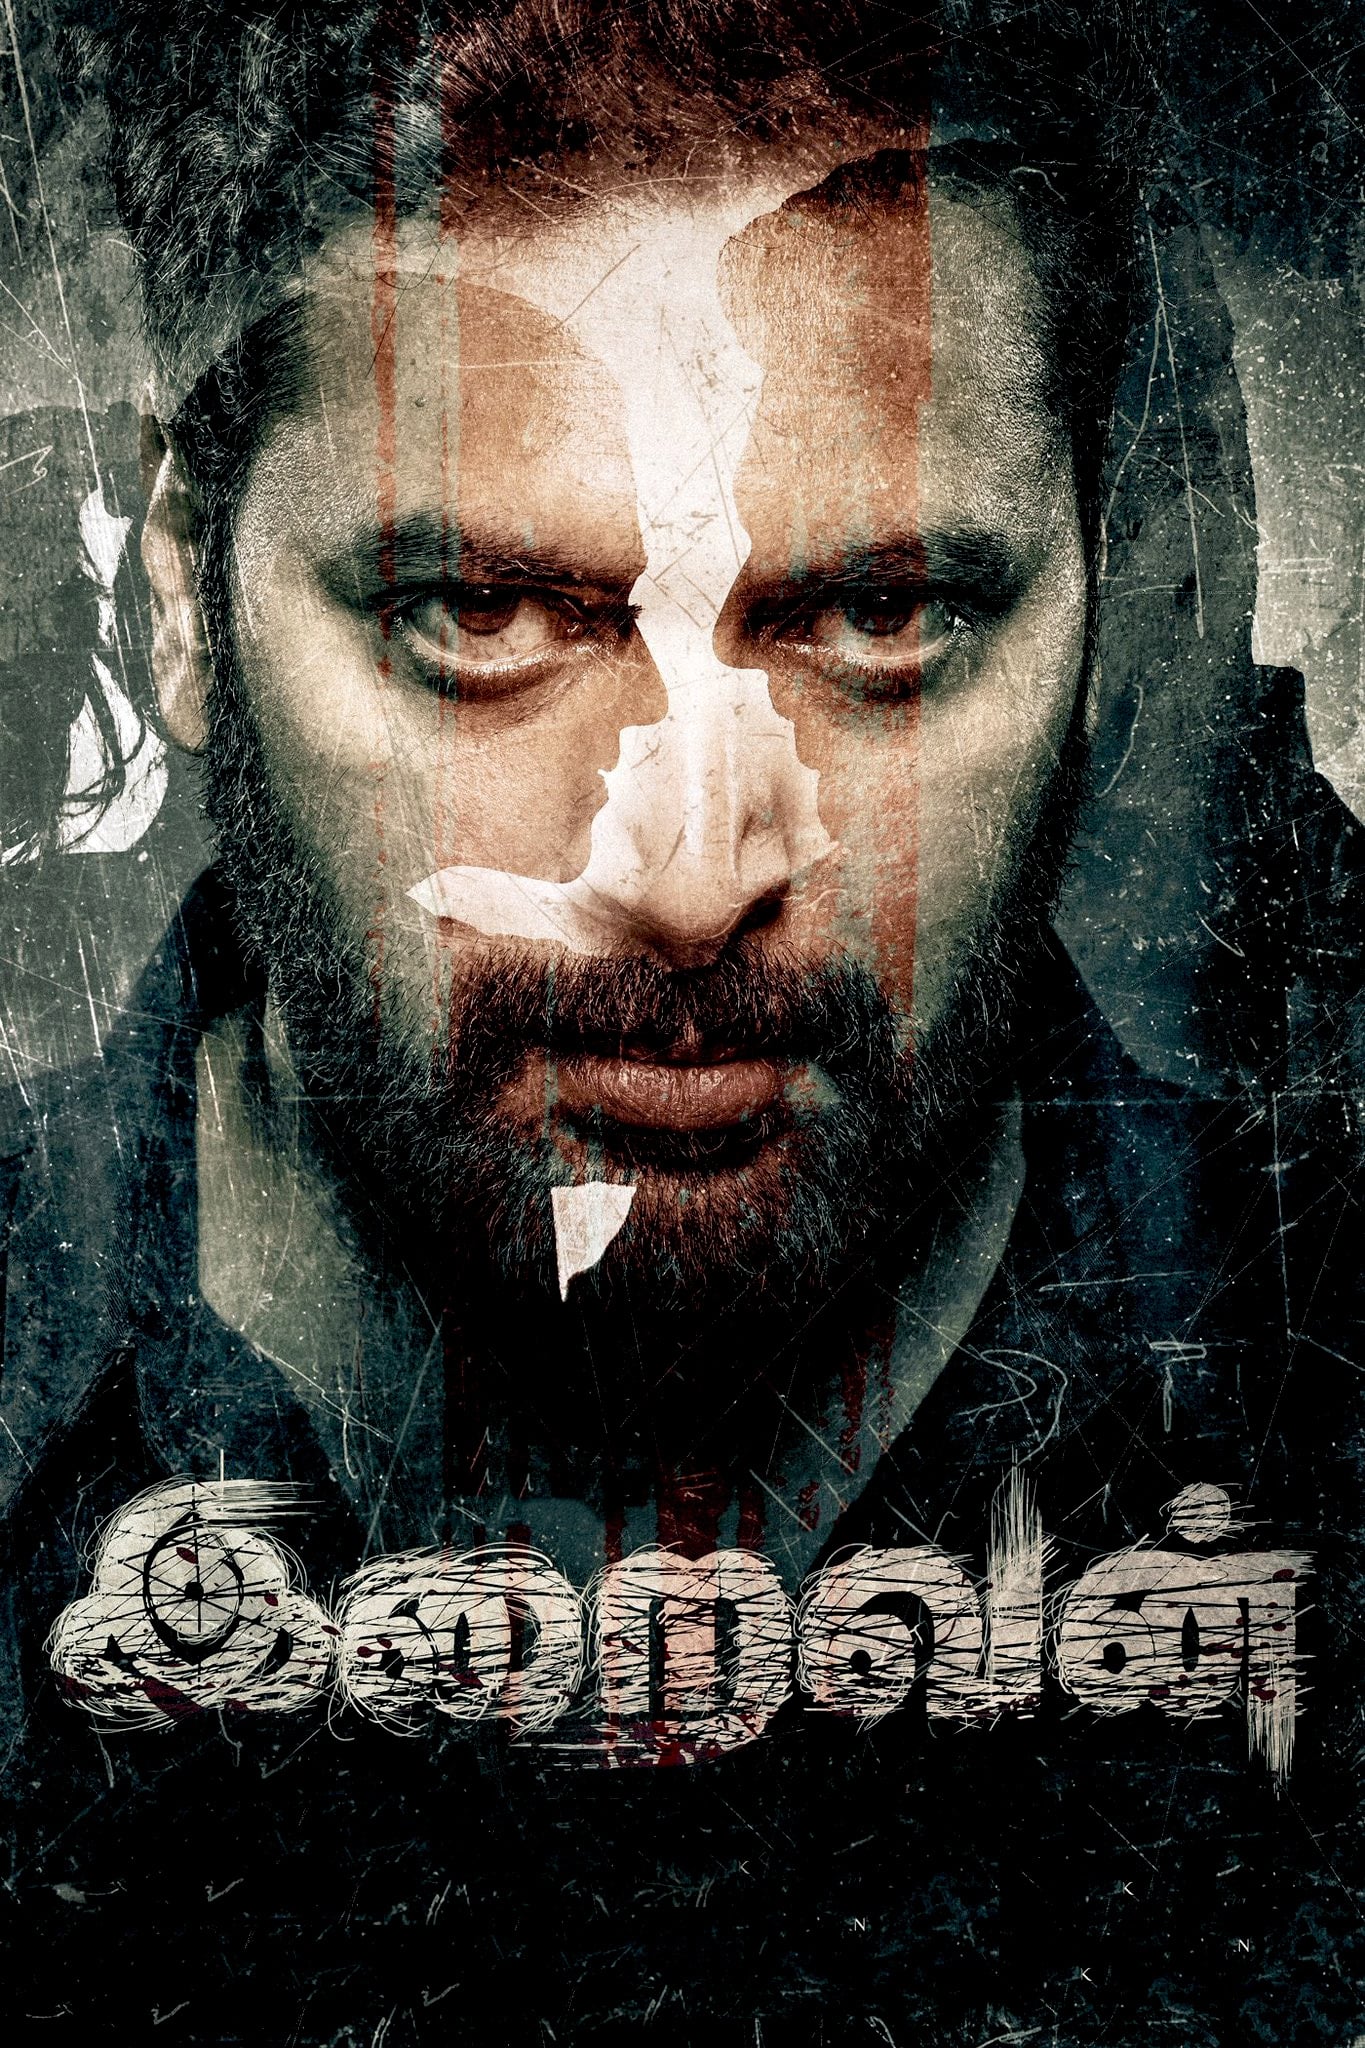 Poster for the movie "Iraivan"